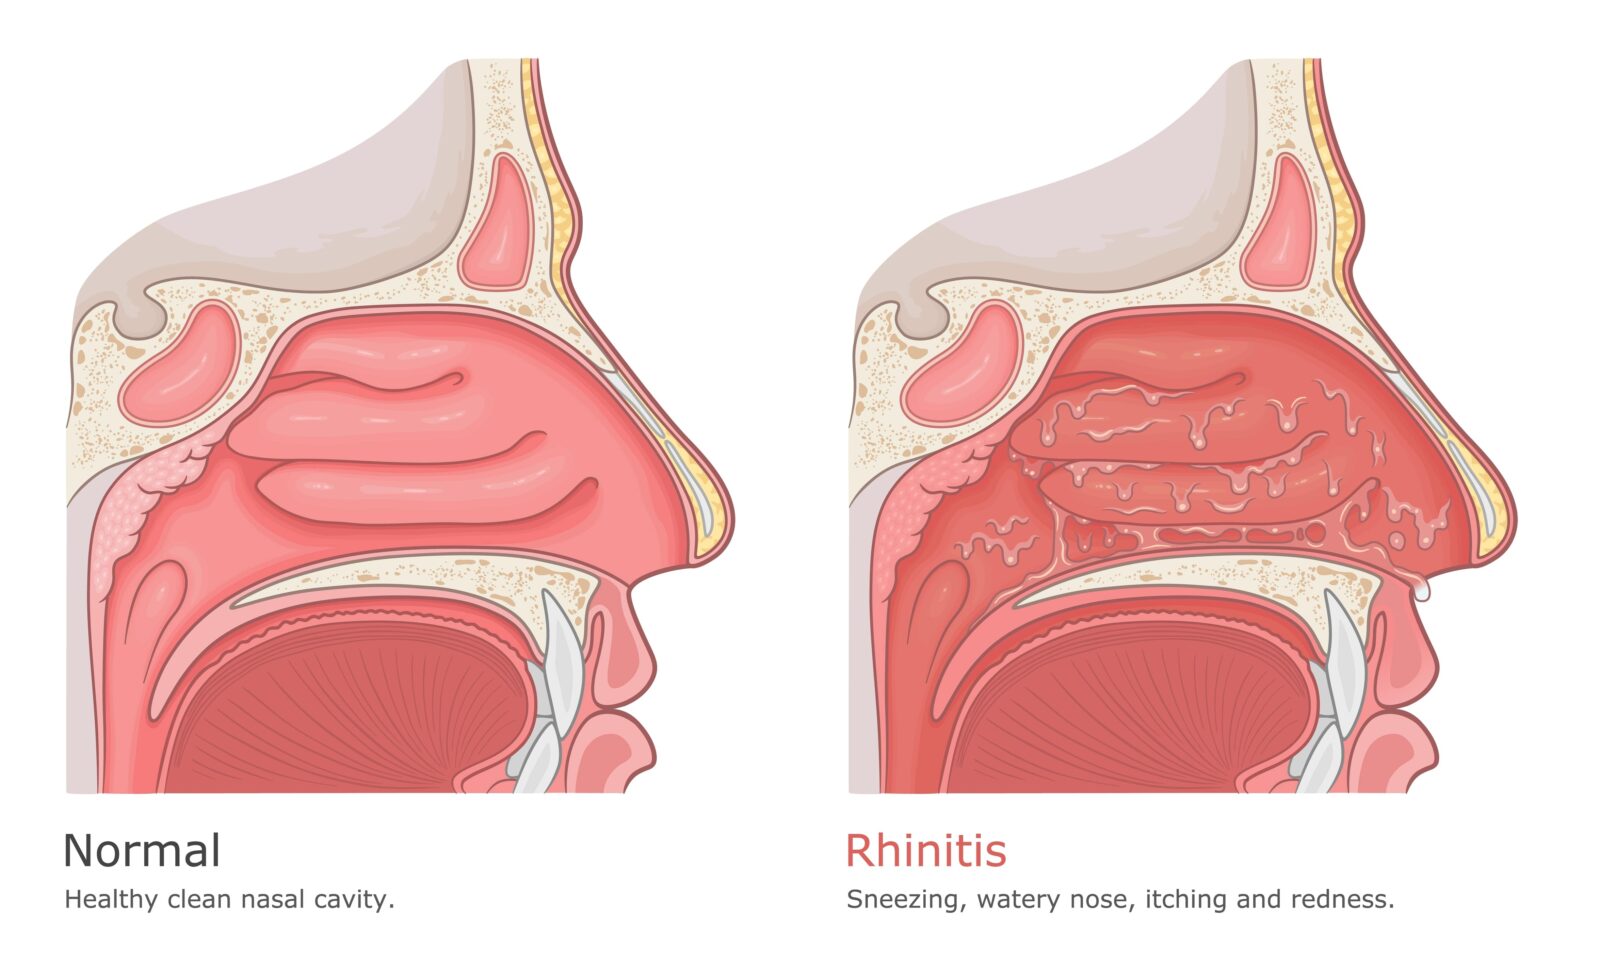 side profile of normal nasal passages vs. nasal passages affected by rhinitis